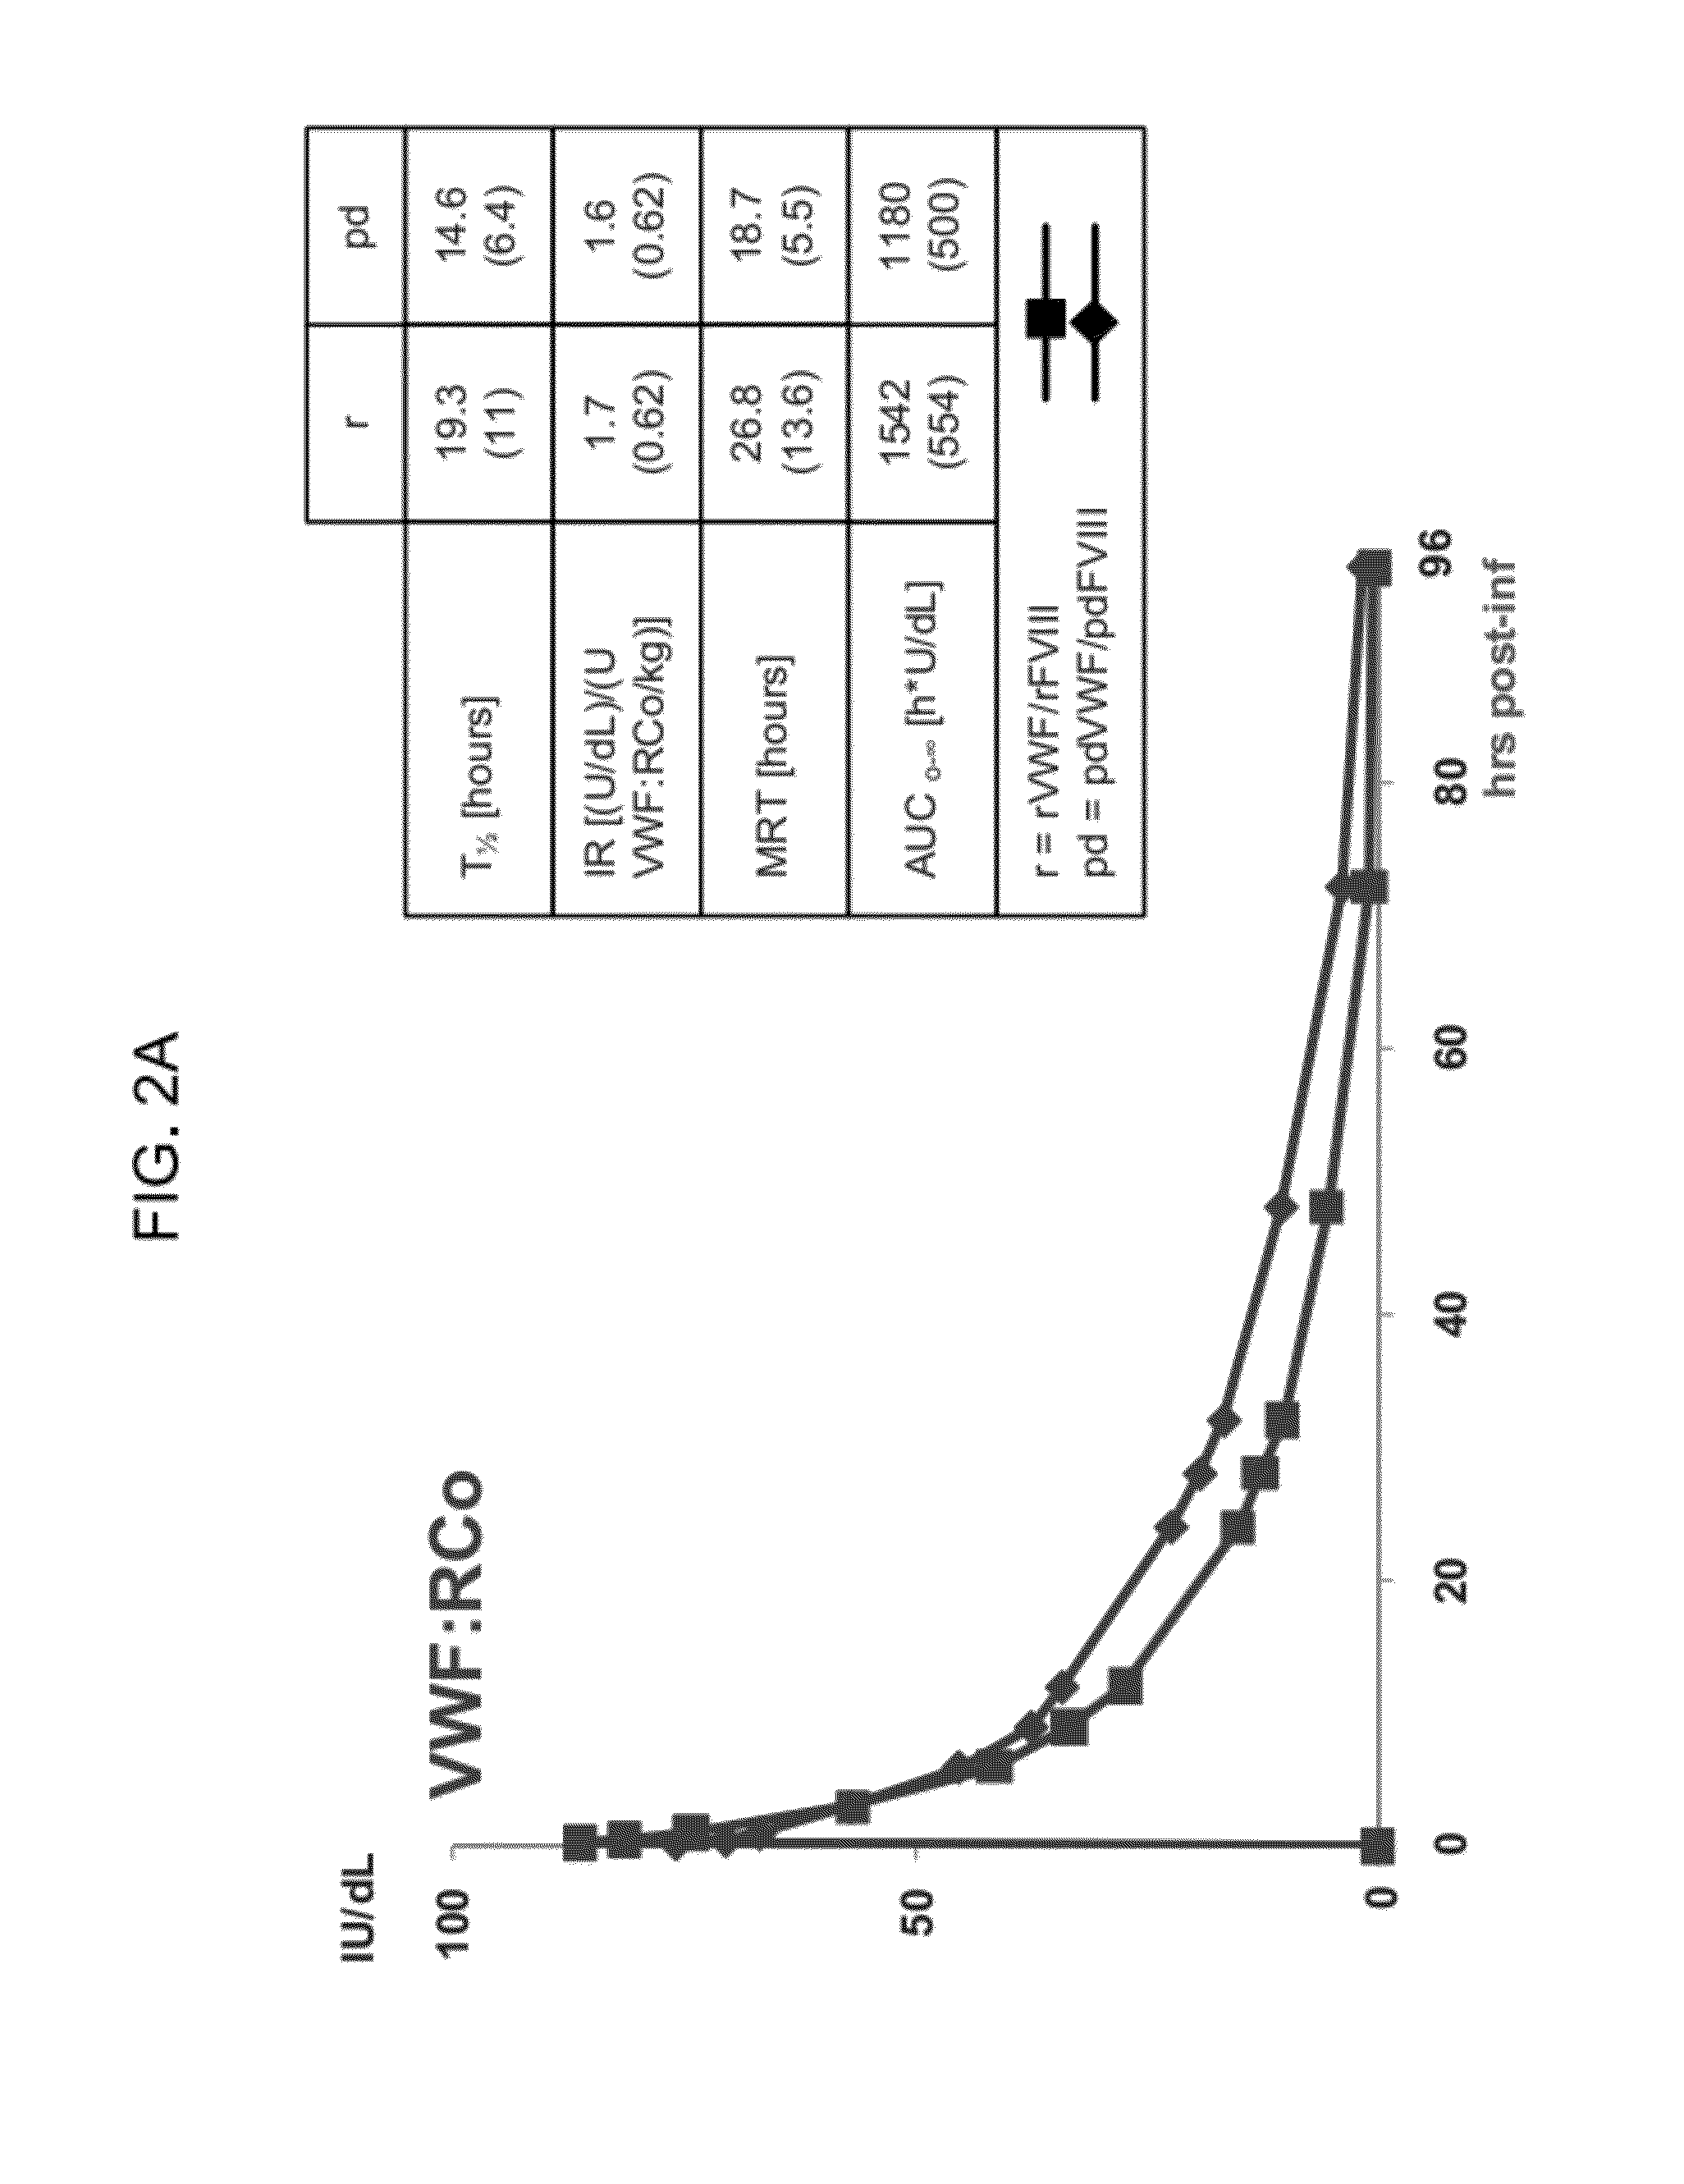 Treatment of coagulation disease by administration of recombinant vwf